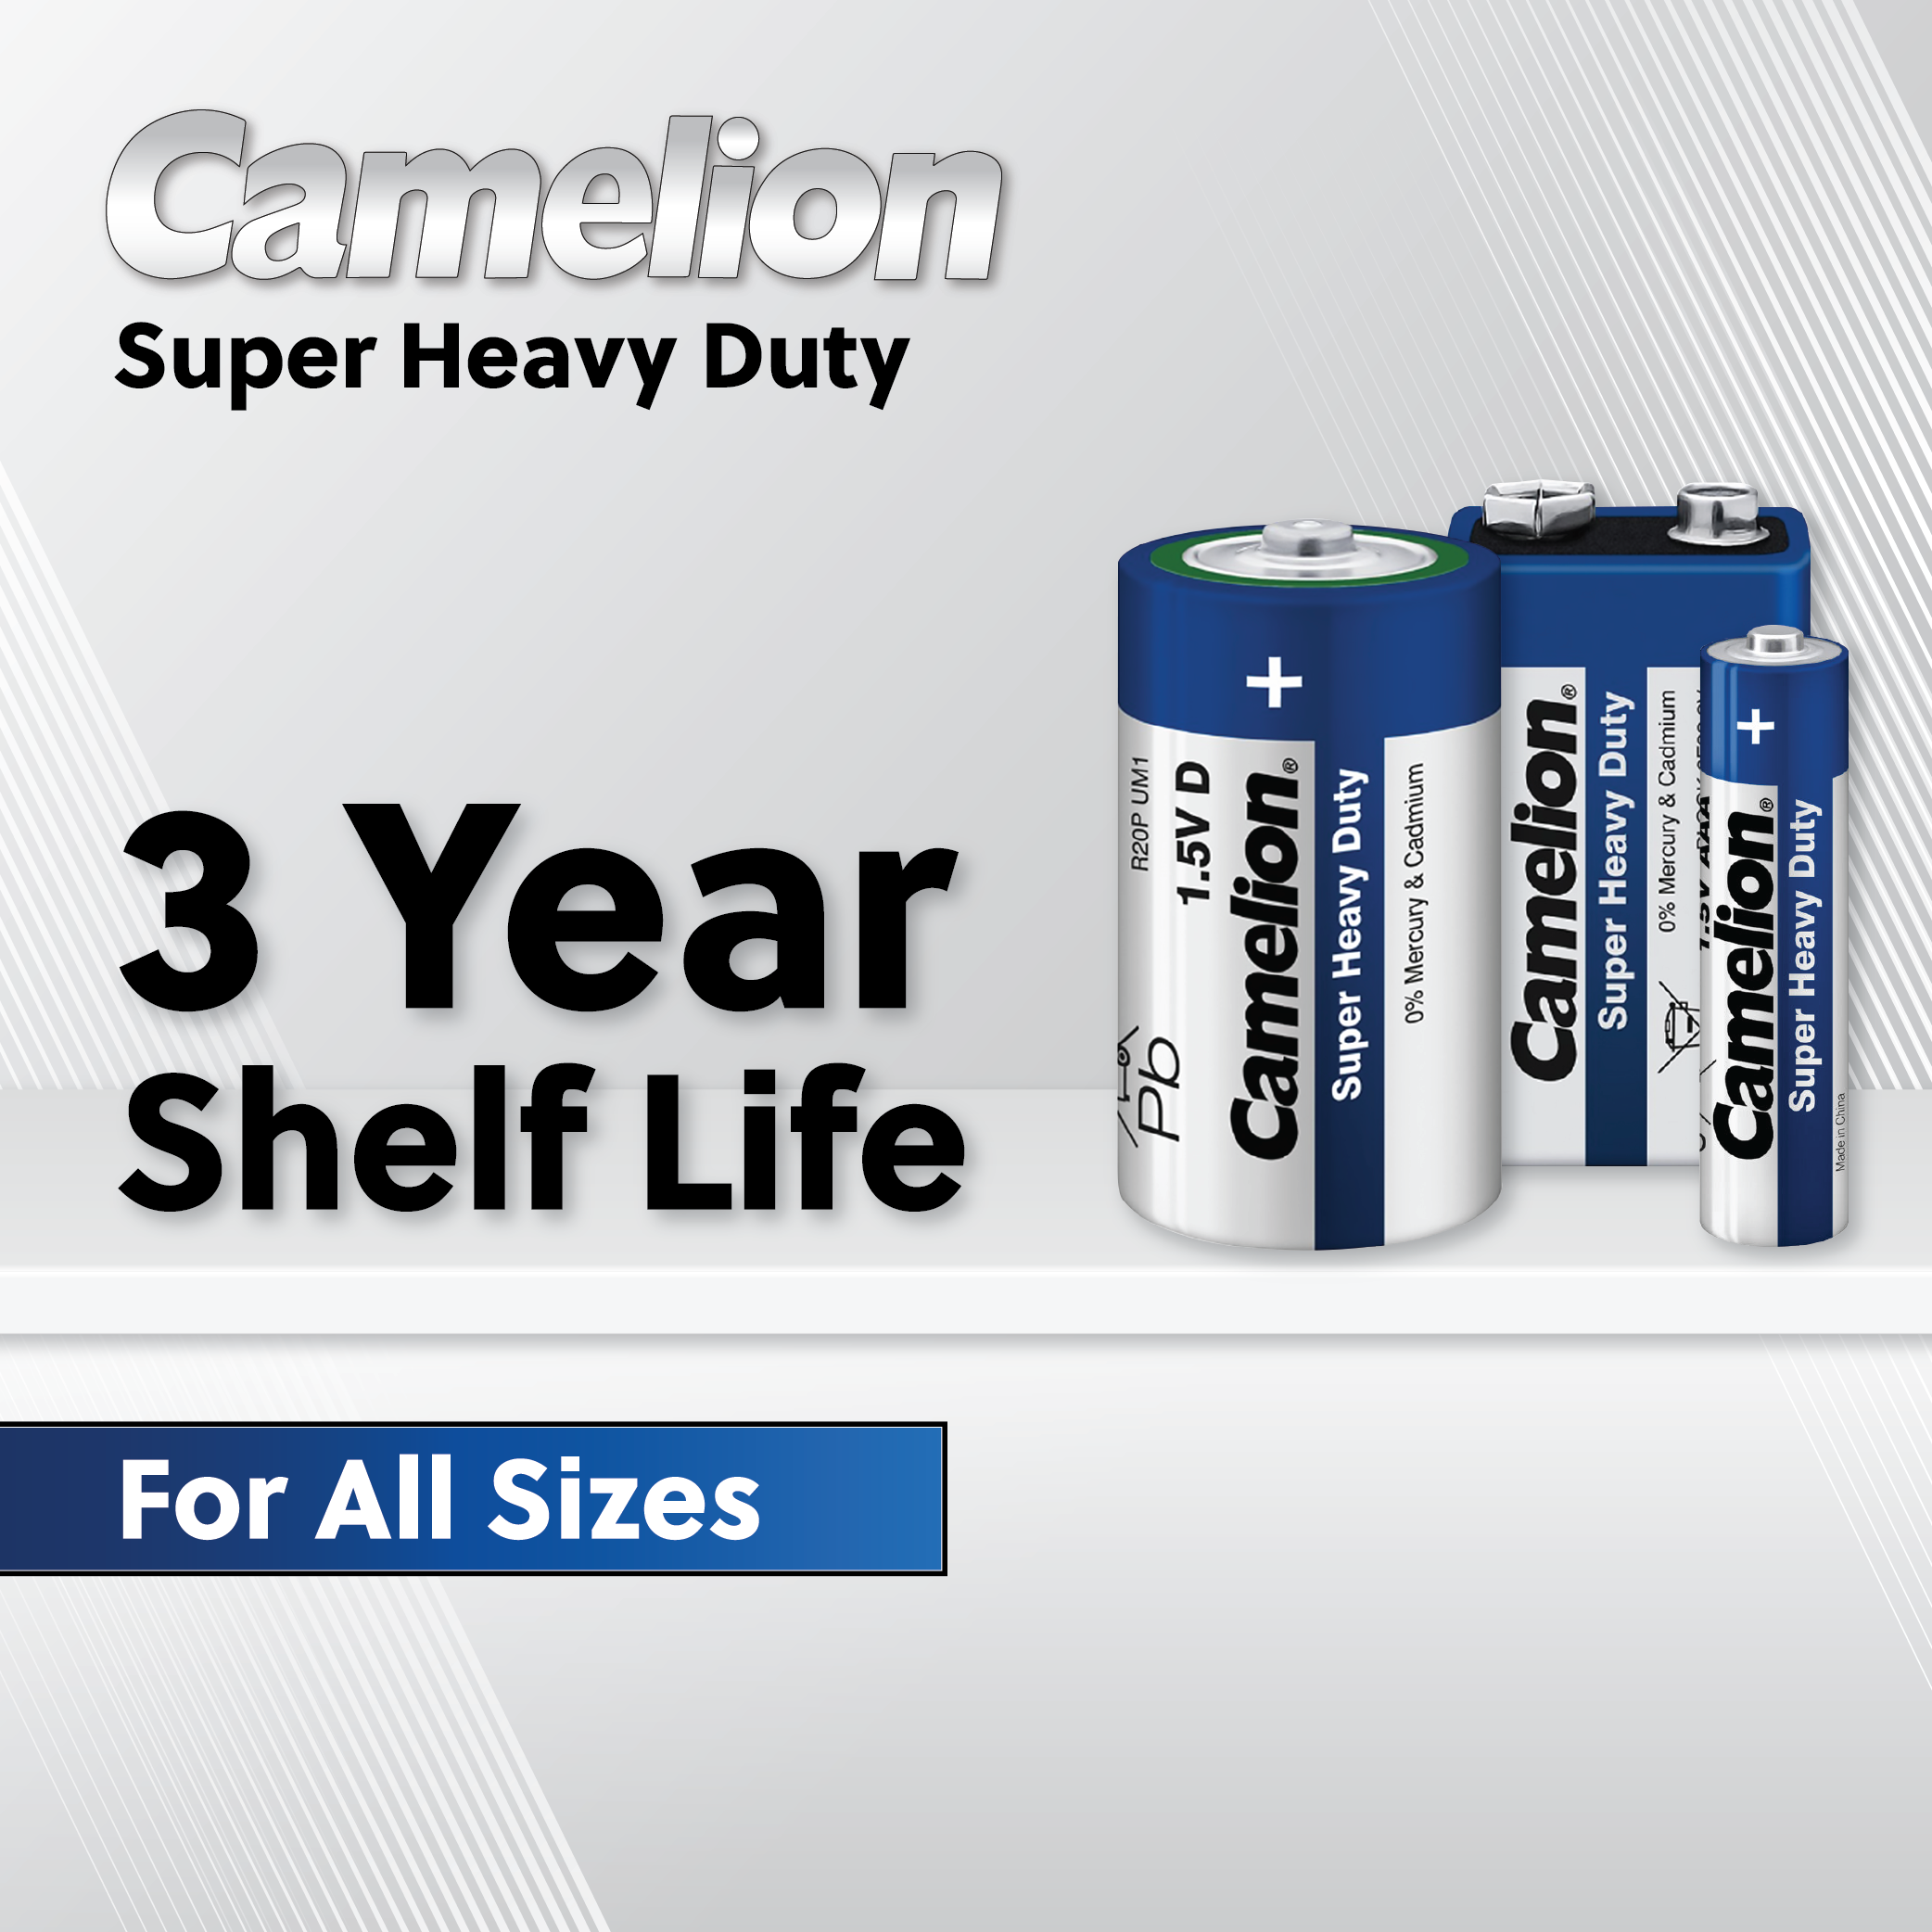 Camelion AAA Super Heavy Blister Pack of 4